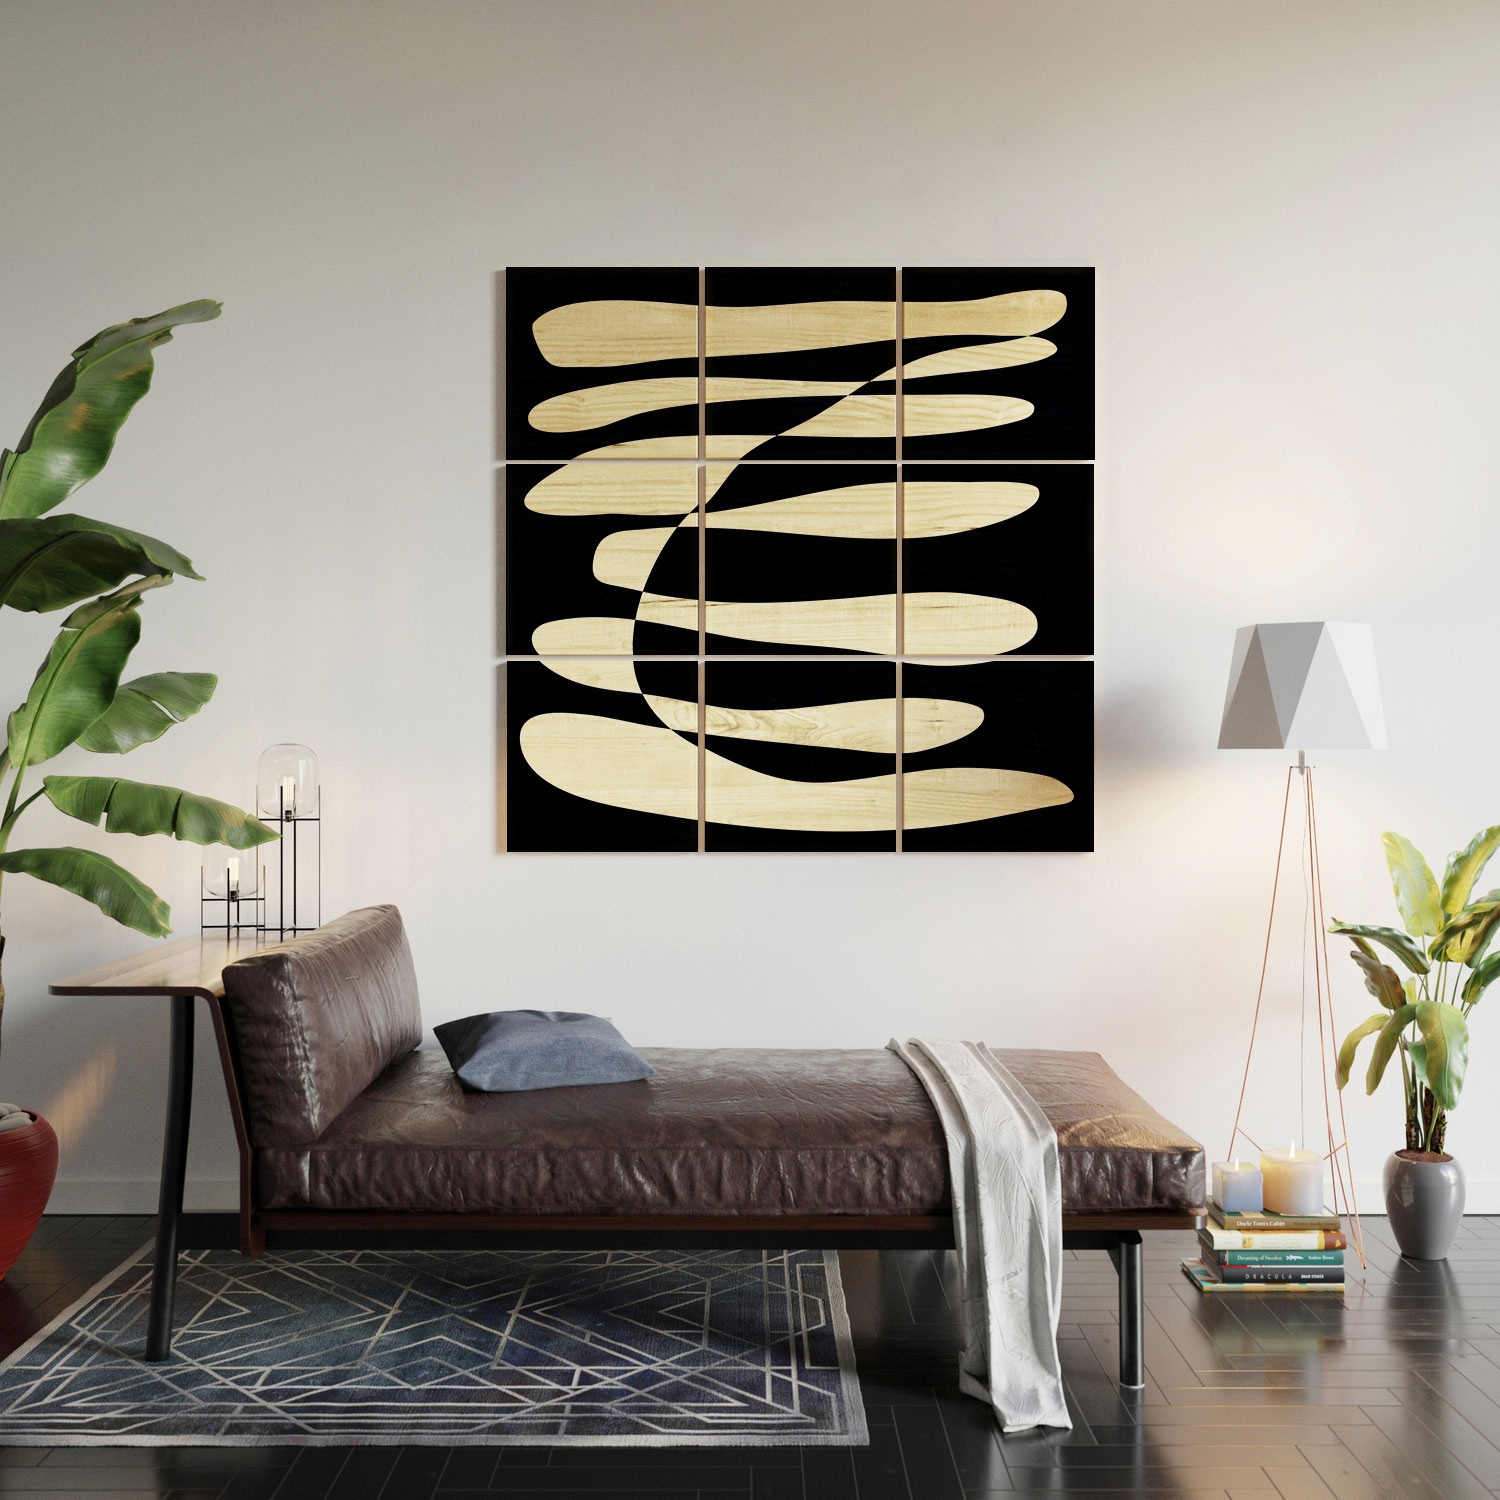 Abstract Composition In Black by June Journal - Wood Wall Mural3' X 3' (Nine 12" Wood Squares) - Image 3